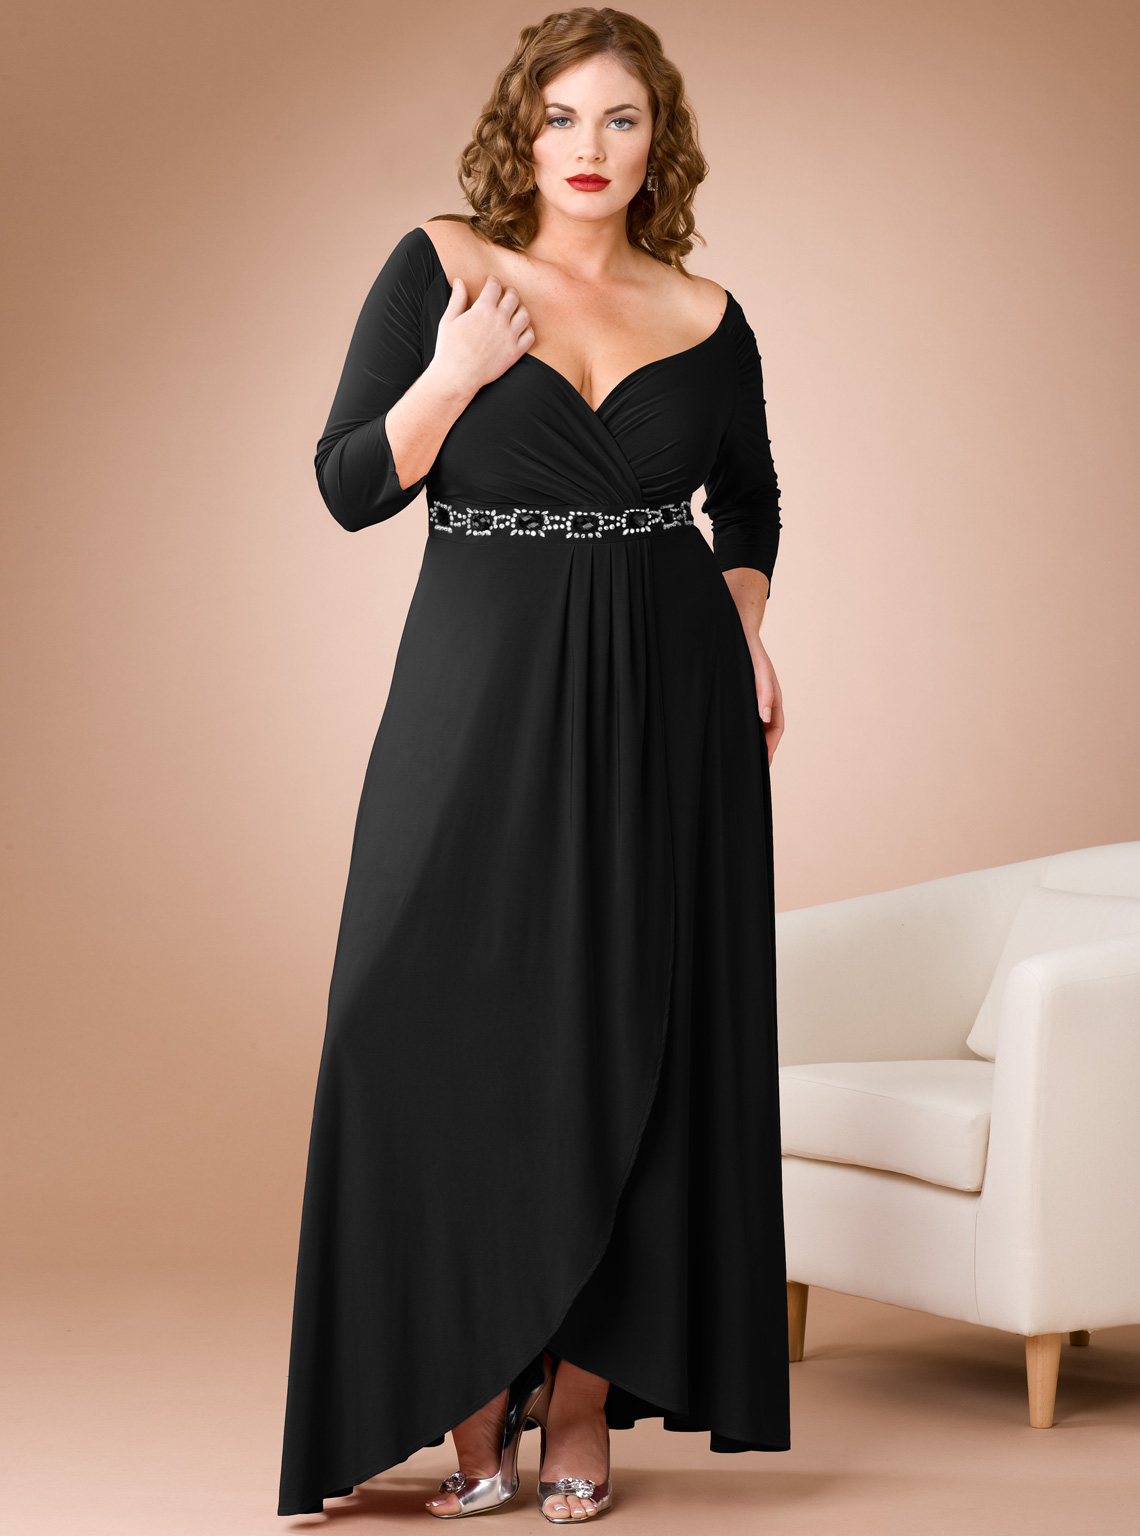 Formal Jacket Dresses Plus Sizes : Guide Of Selecting